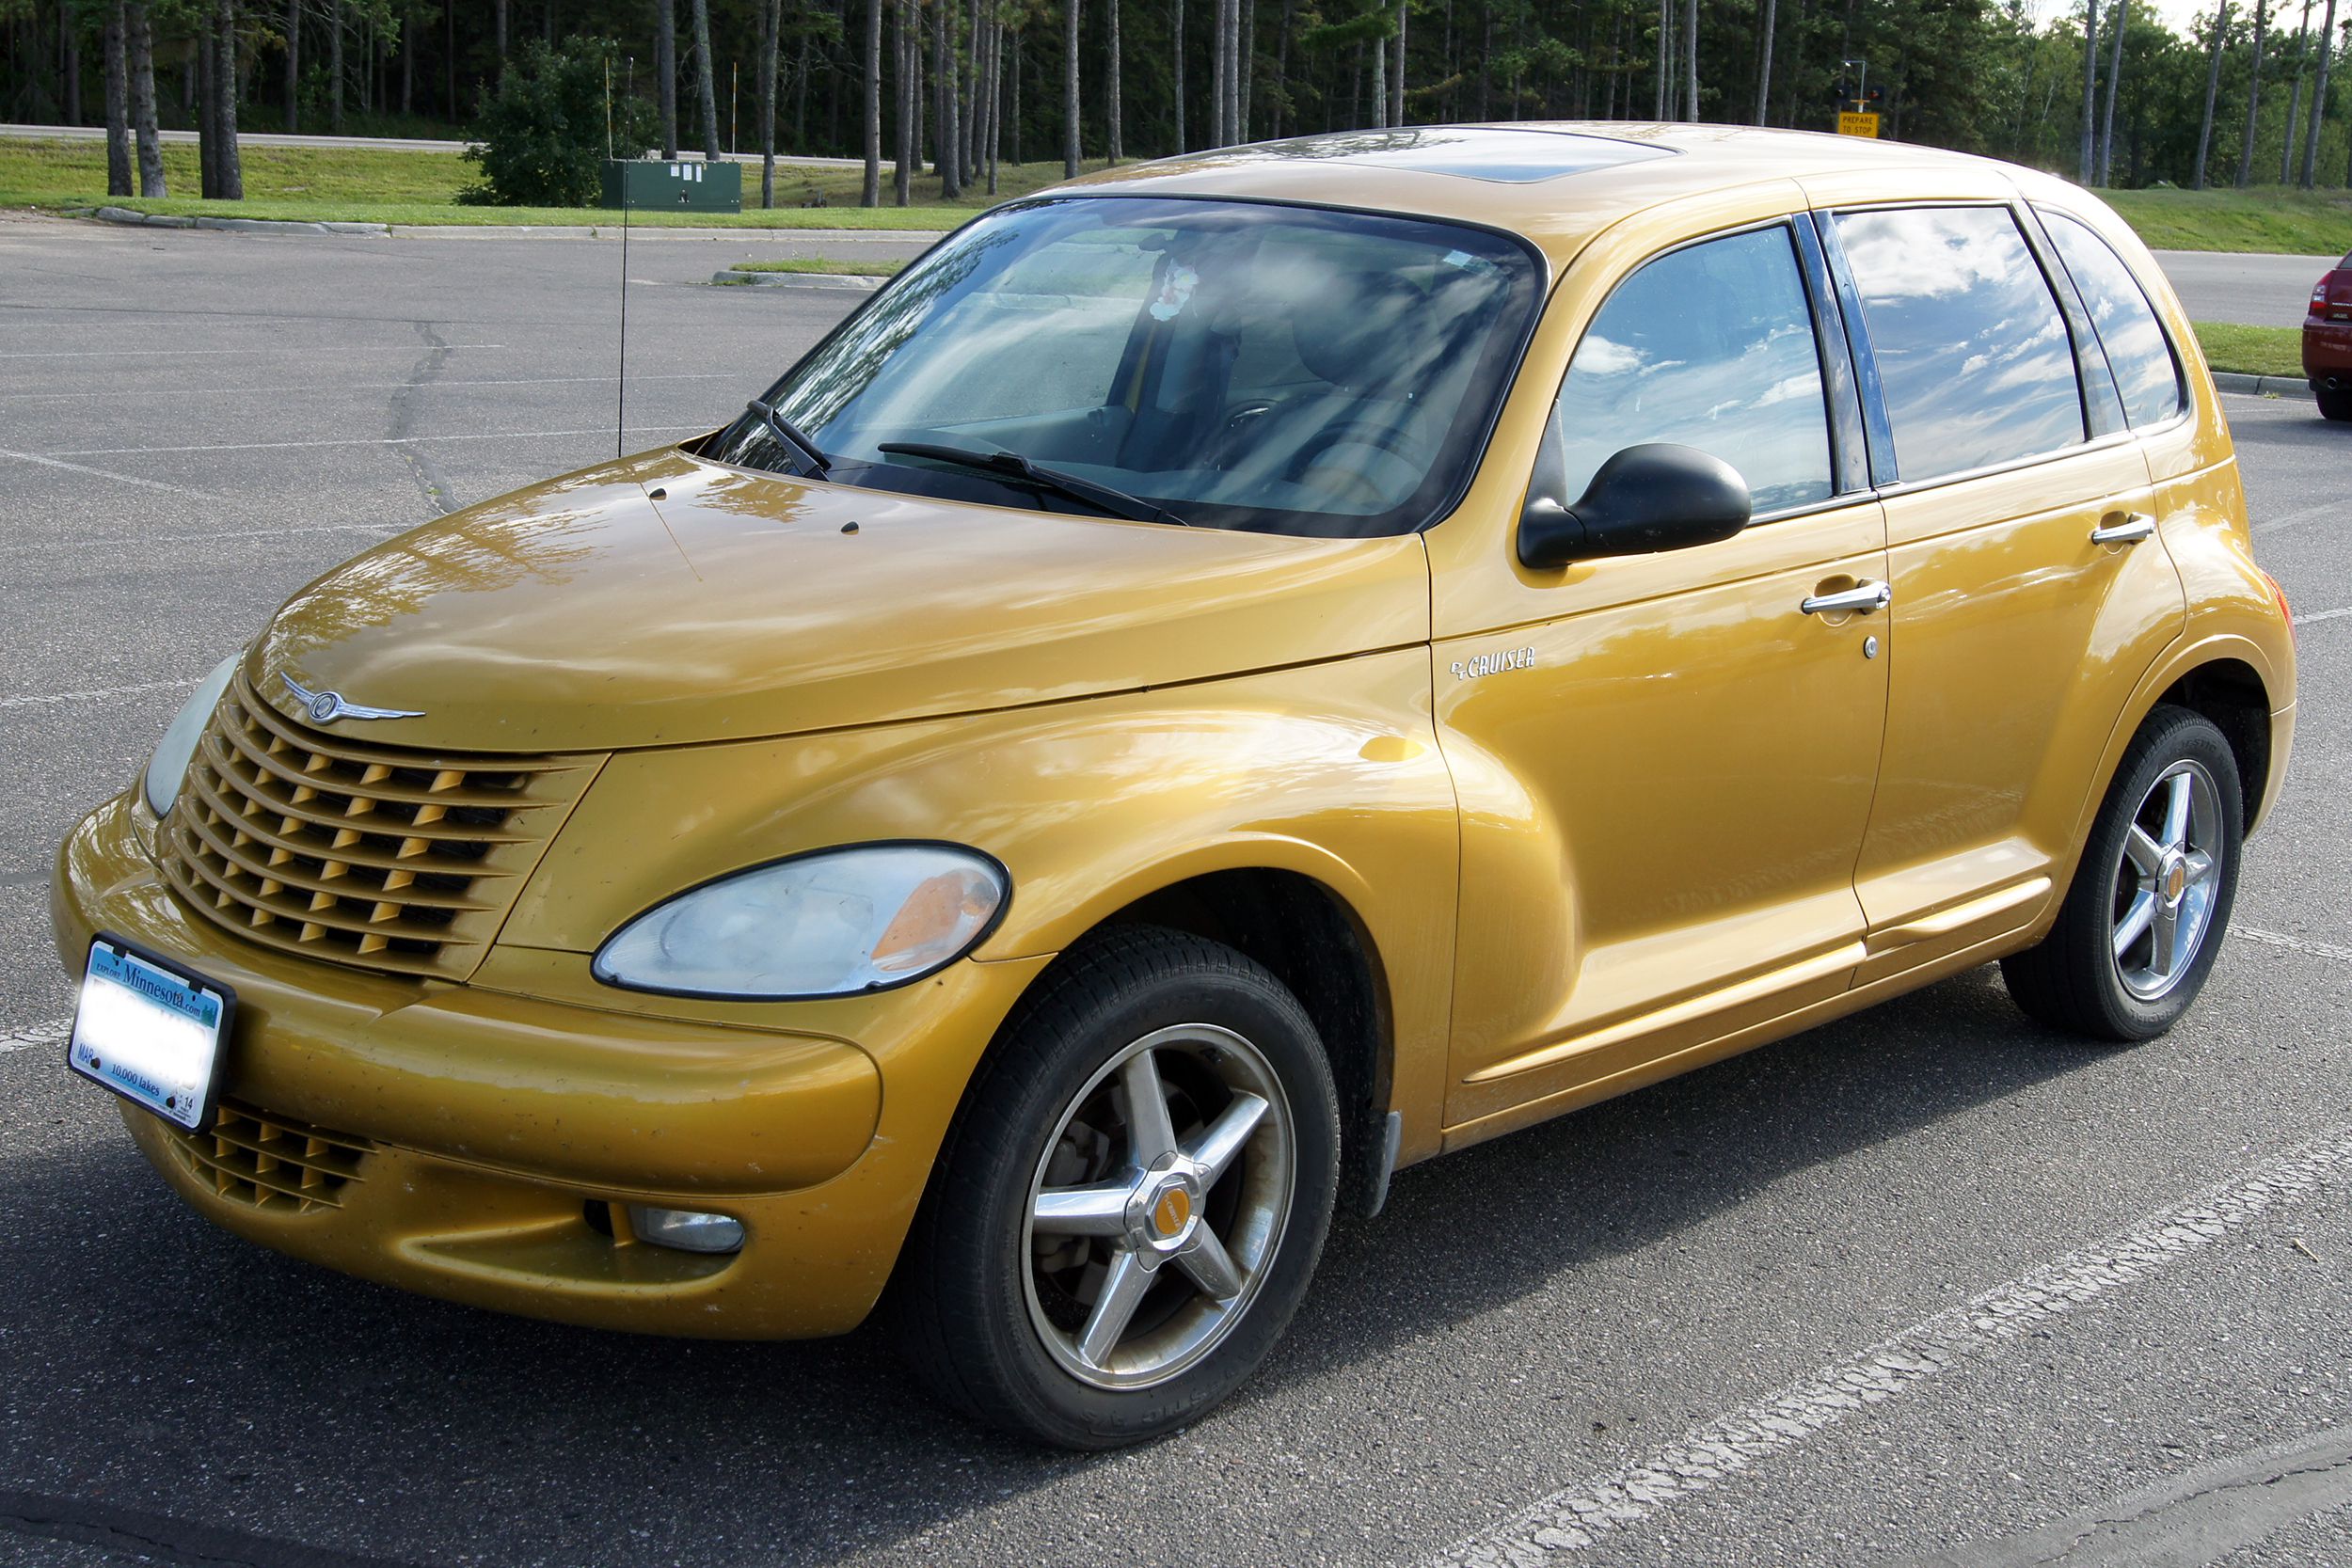 <p>The PT Cruiser remains one of the most polarizing cars in recent memory. For every buyer who liked these cars' aggressively retro styling, there were five onlookers tittering about how this auto was hard on the eyes. Count us among the latter camp. "The PT was a shrunken minivan, a bloated Neon, a <a href="https://blog.cheapism.com/classic-cars/">car for families</a> who needed something basic and <a href="https://jalopnik.com/5583413/pt-cruiser-a-eulogy-its-about-damn-time">leaned a little too hard on nostalgia</a>," Jalopnik sneers. Couldn't have said it better ourselves.</p>